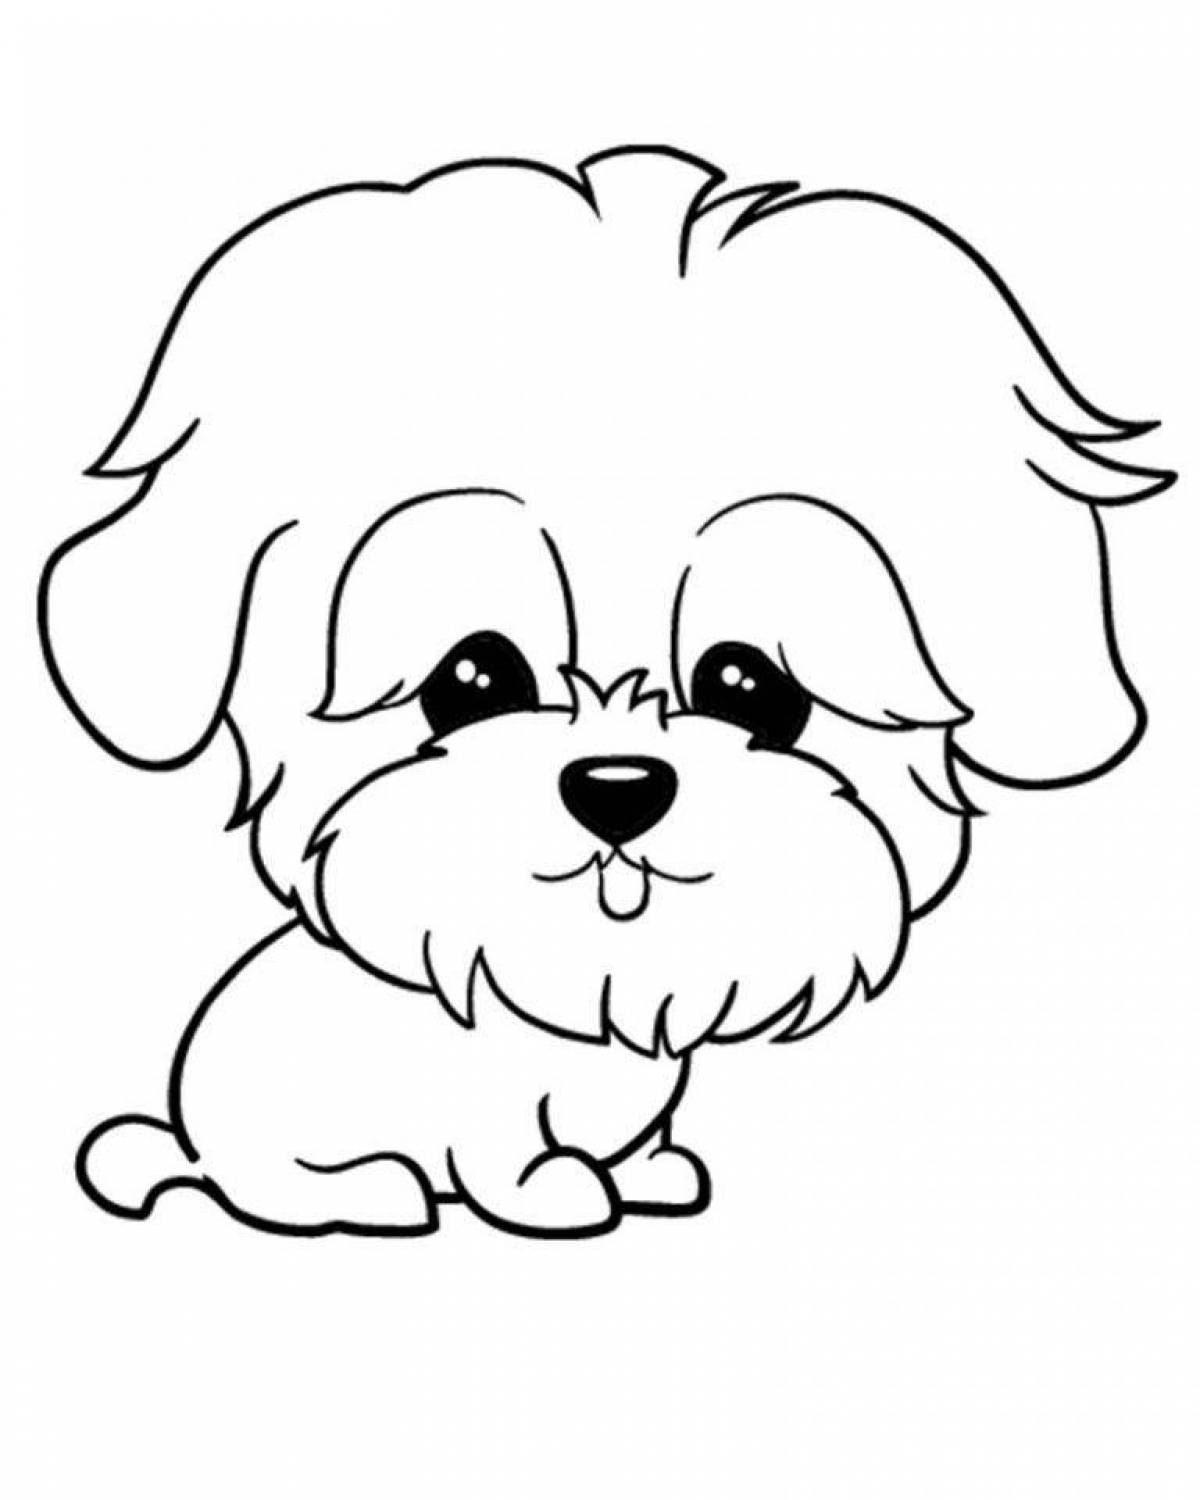 Wiggly little dog coloring page